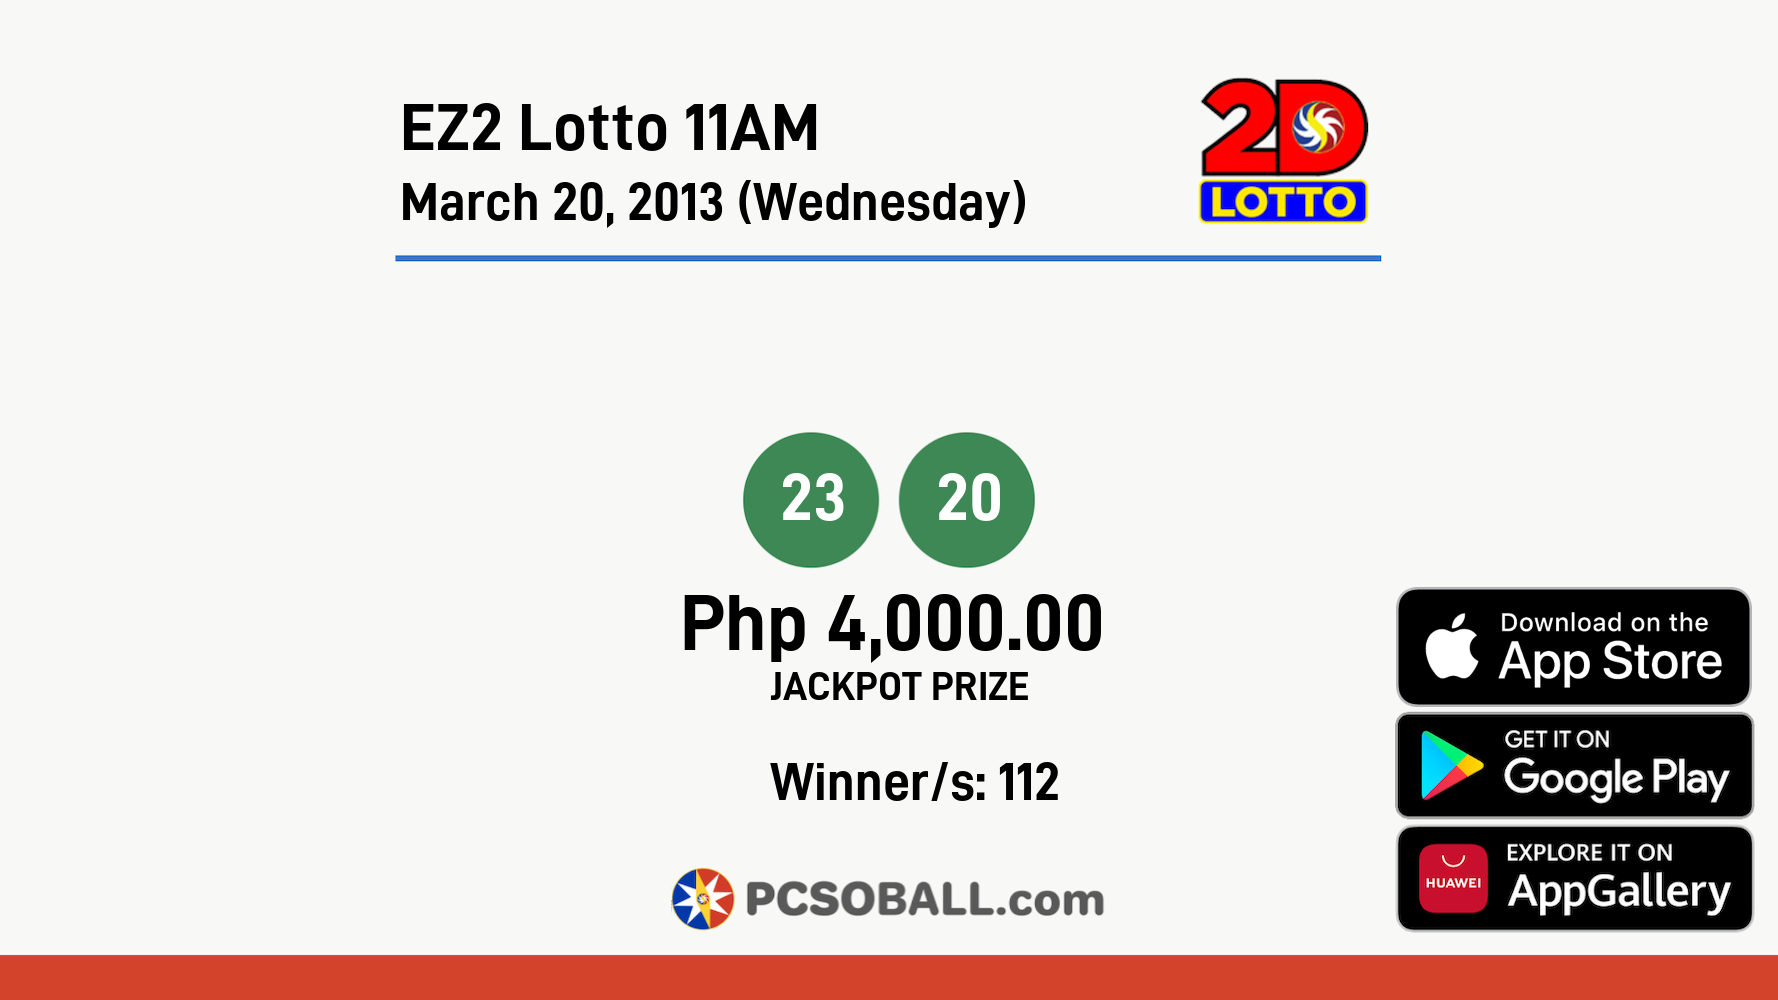 EZ2 Lotto 11AM March 20, 2013 (Wednesday) Result